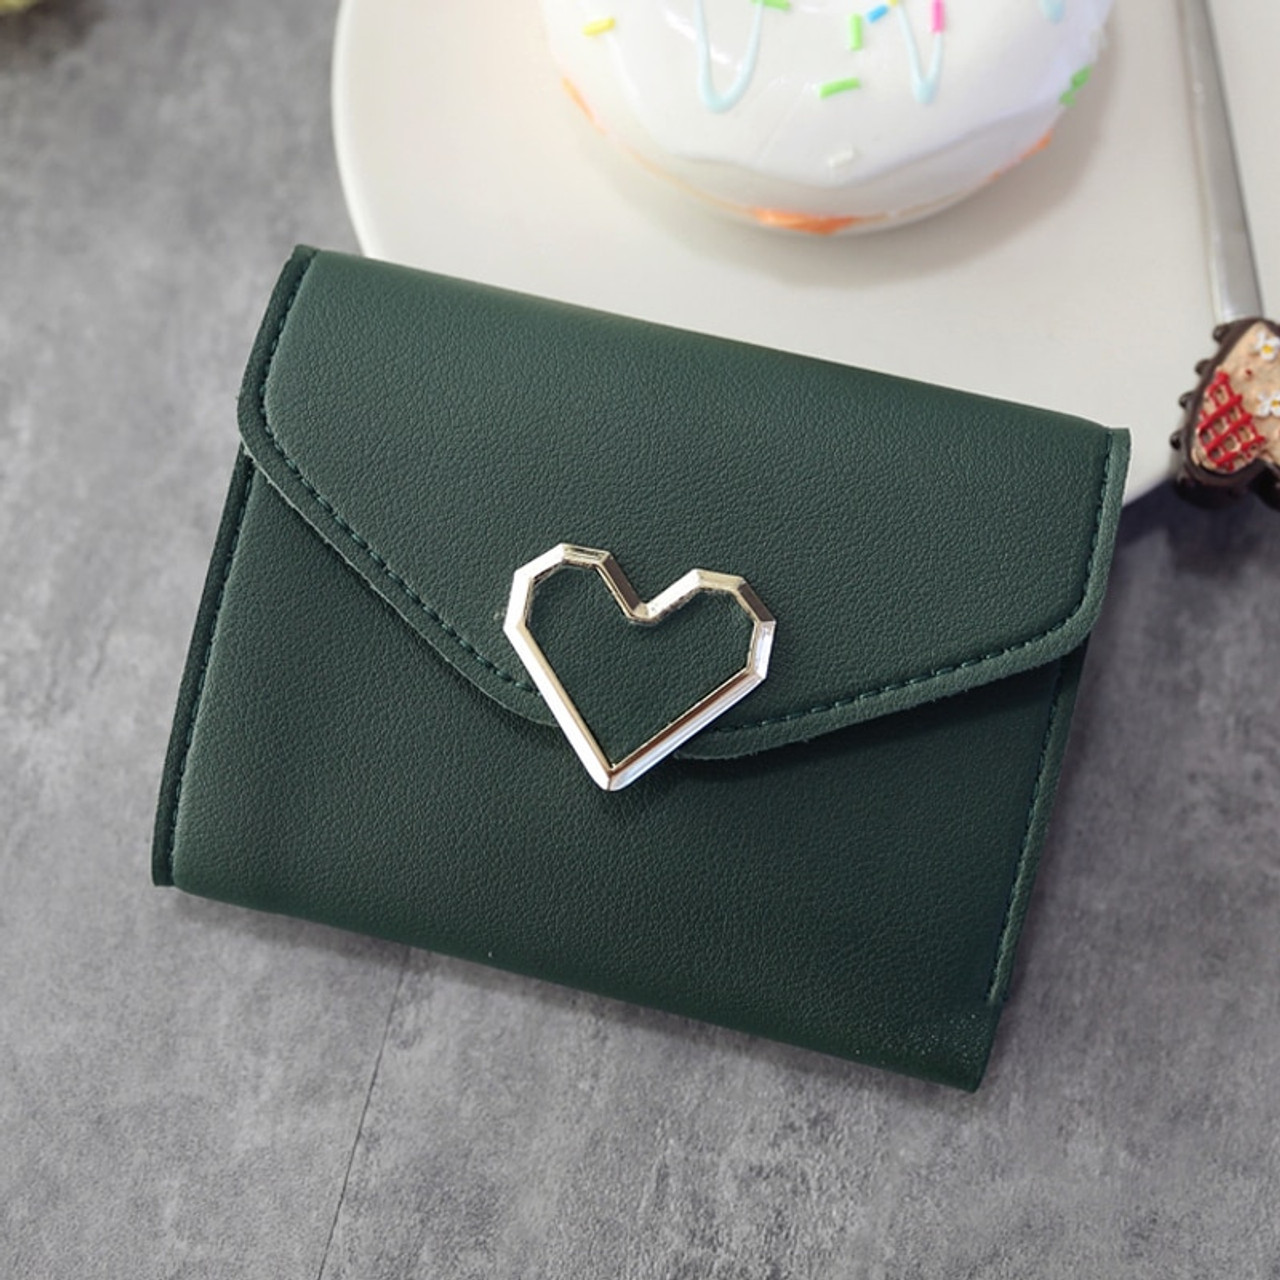 Slim Leather Mini Wallet For Women With Zipper Cute And Thin Wallet With  Coin Zip For Cards And Small Essentials From Sarahzhang88, $3.74 |  DHgate.Com